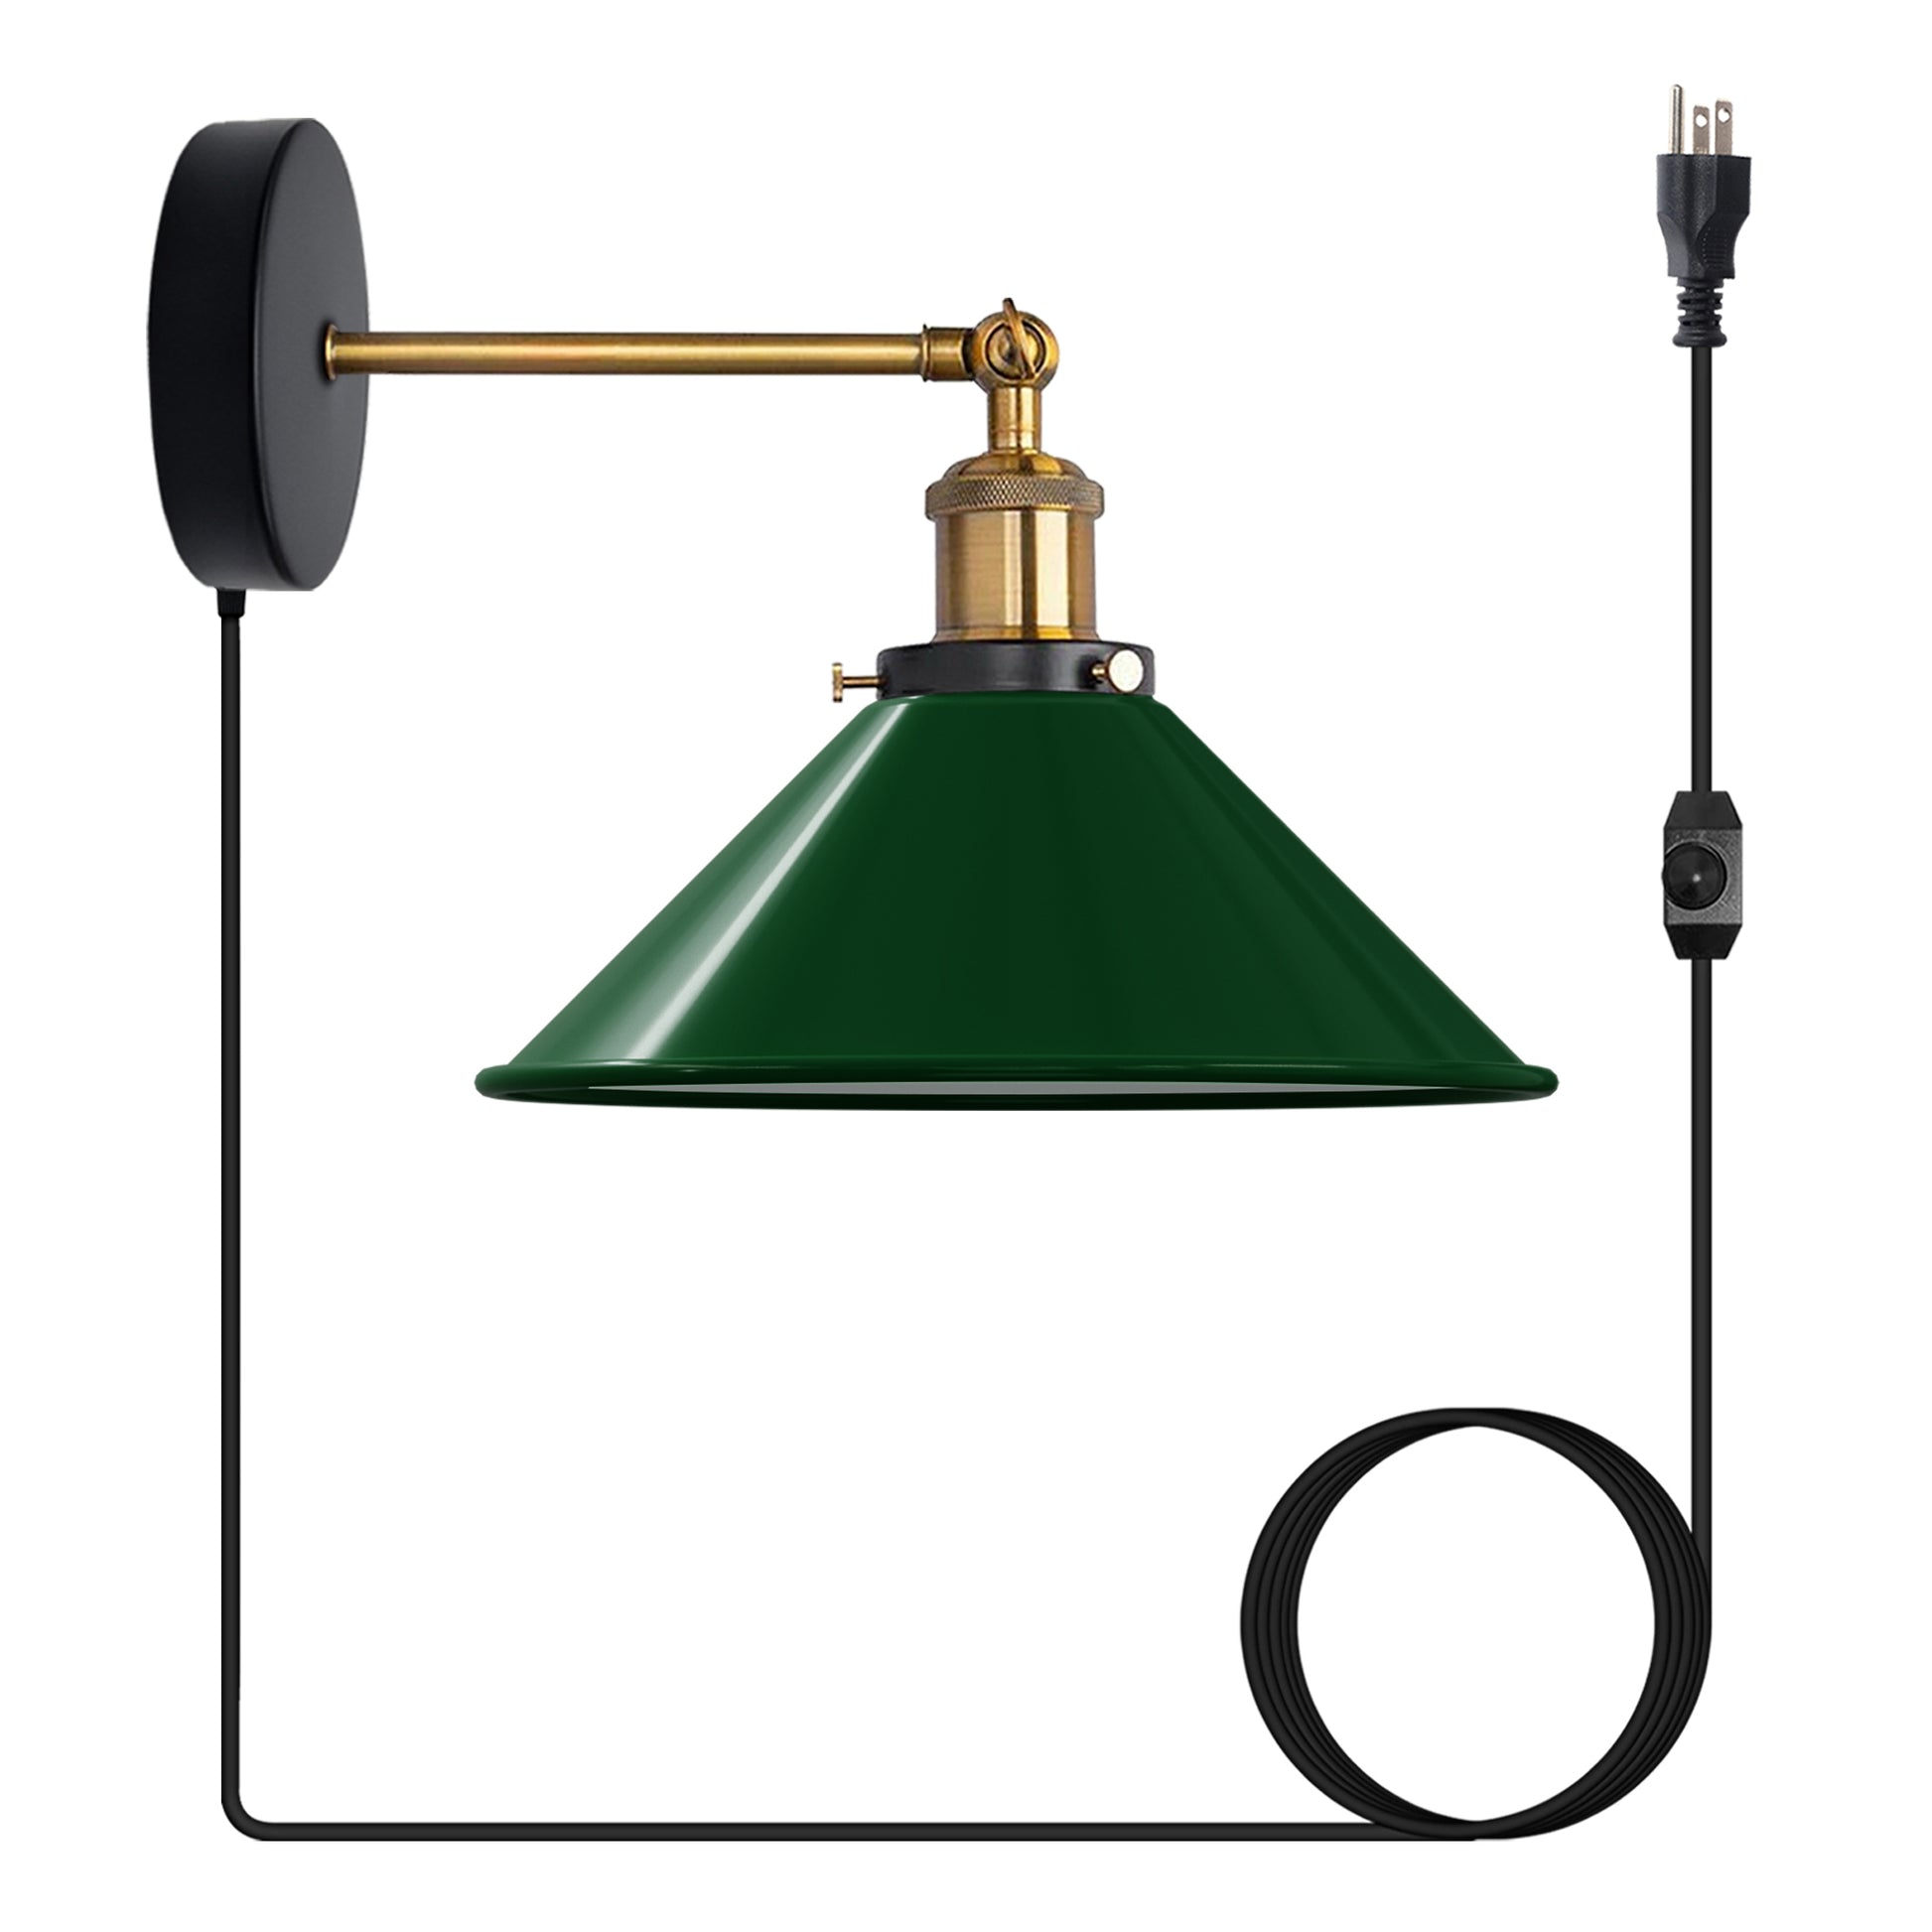 Green Plug-in Wall Light Sconces with Dimmer Switch.JPG